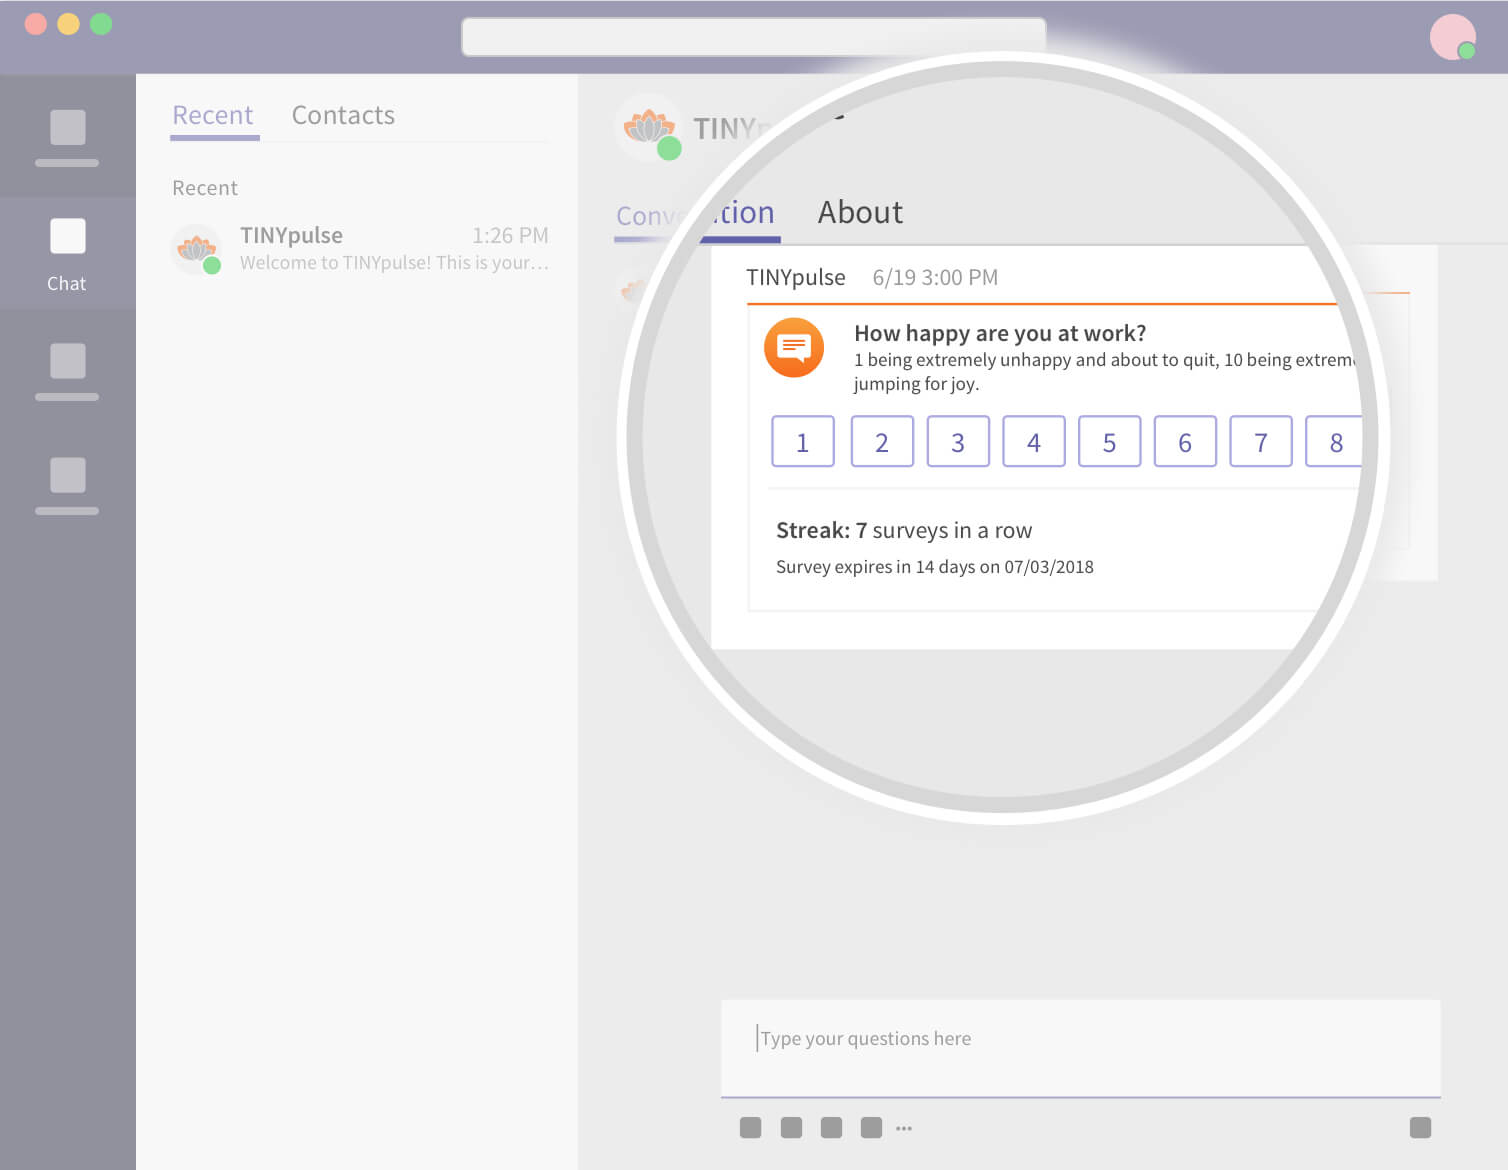 Stylized screenshot of TINYpulse in Microsoft Teams